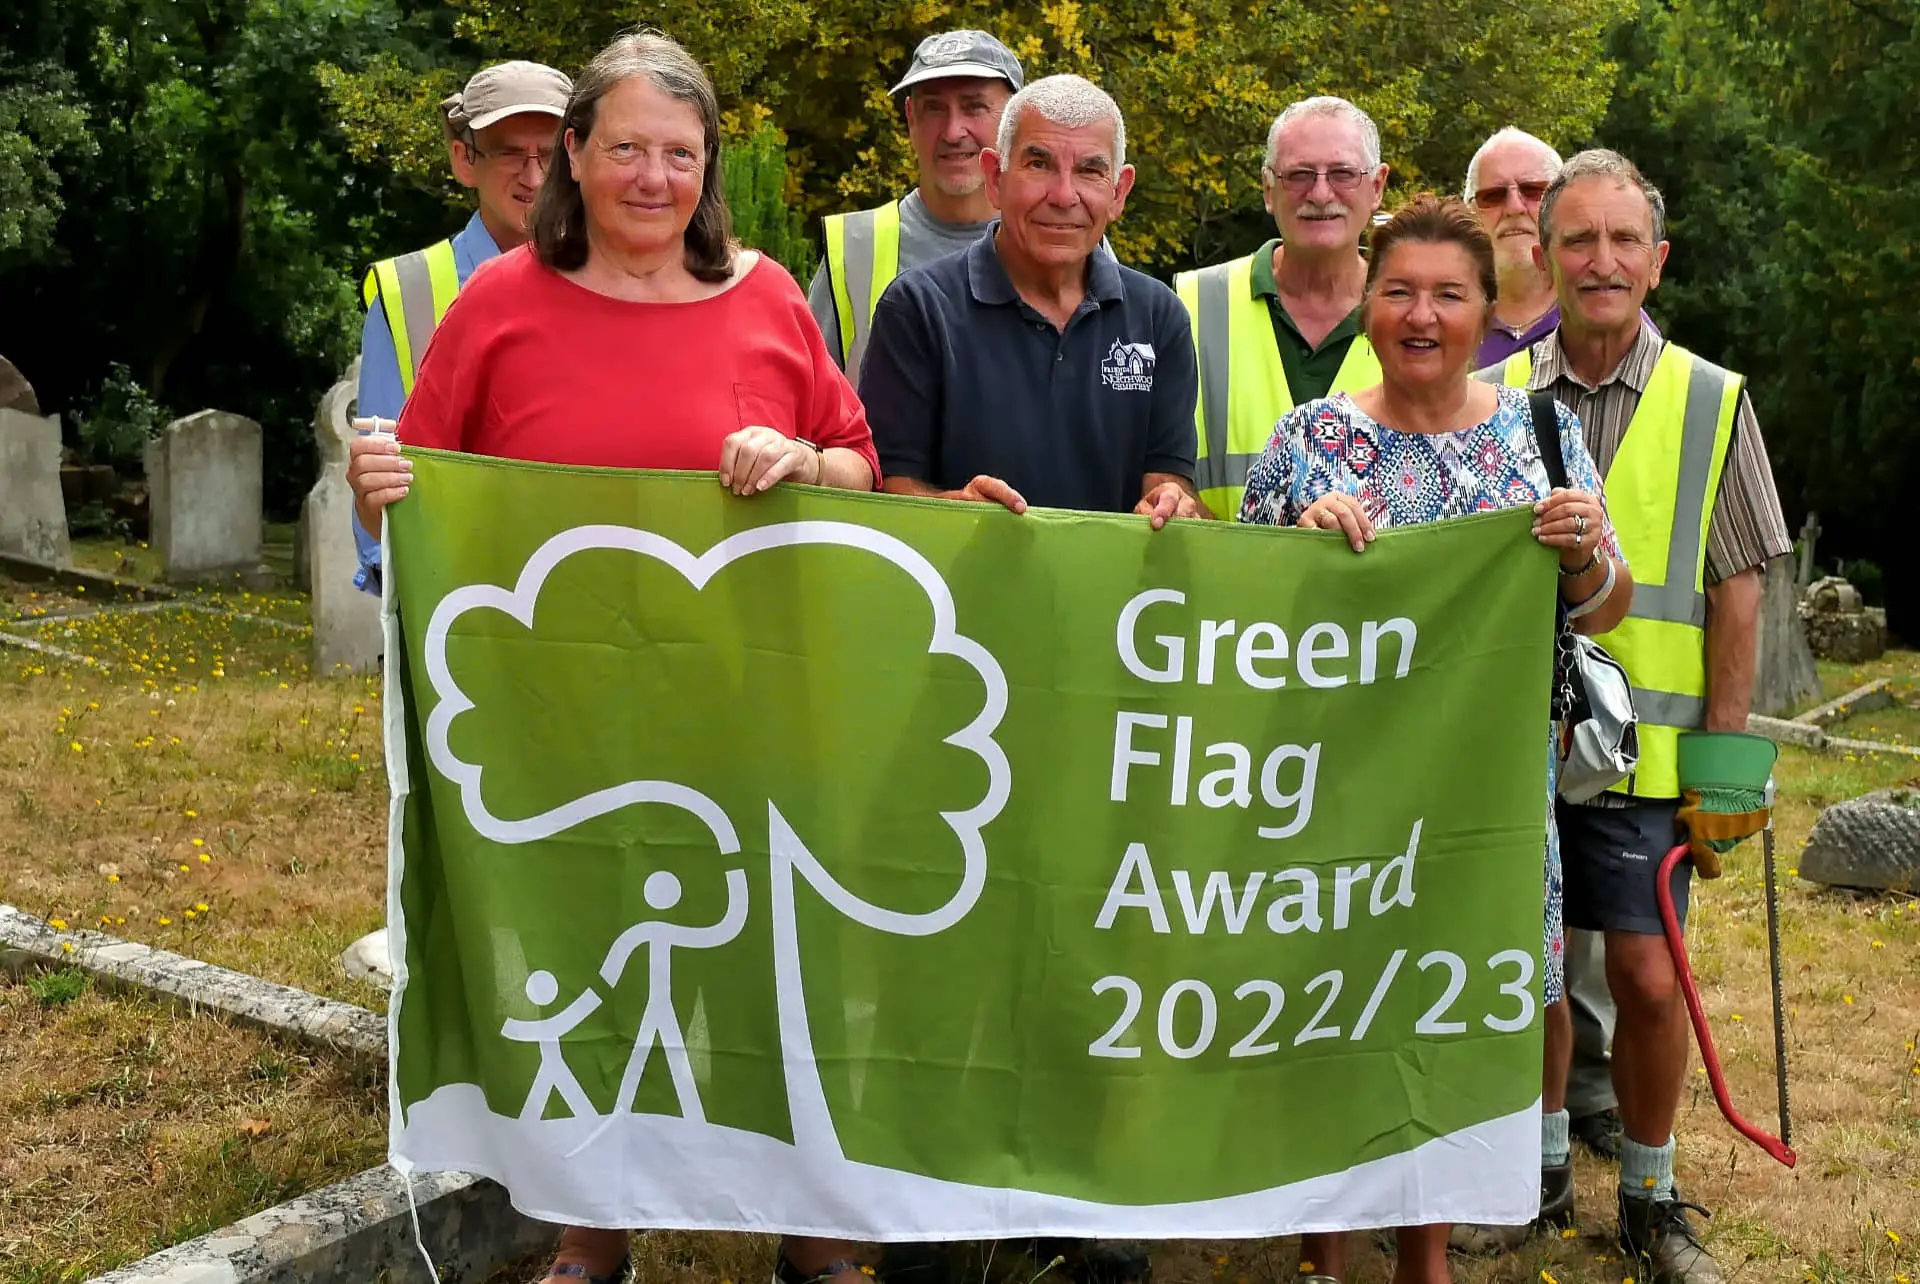 Northwood cemetery team with the green flag award